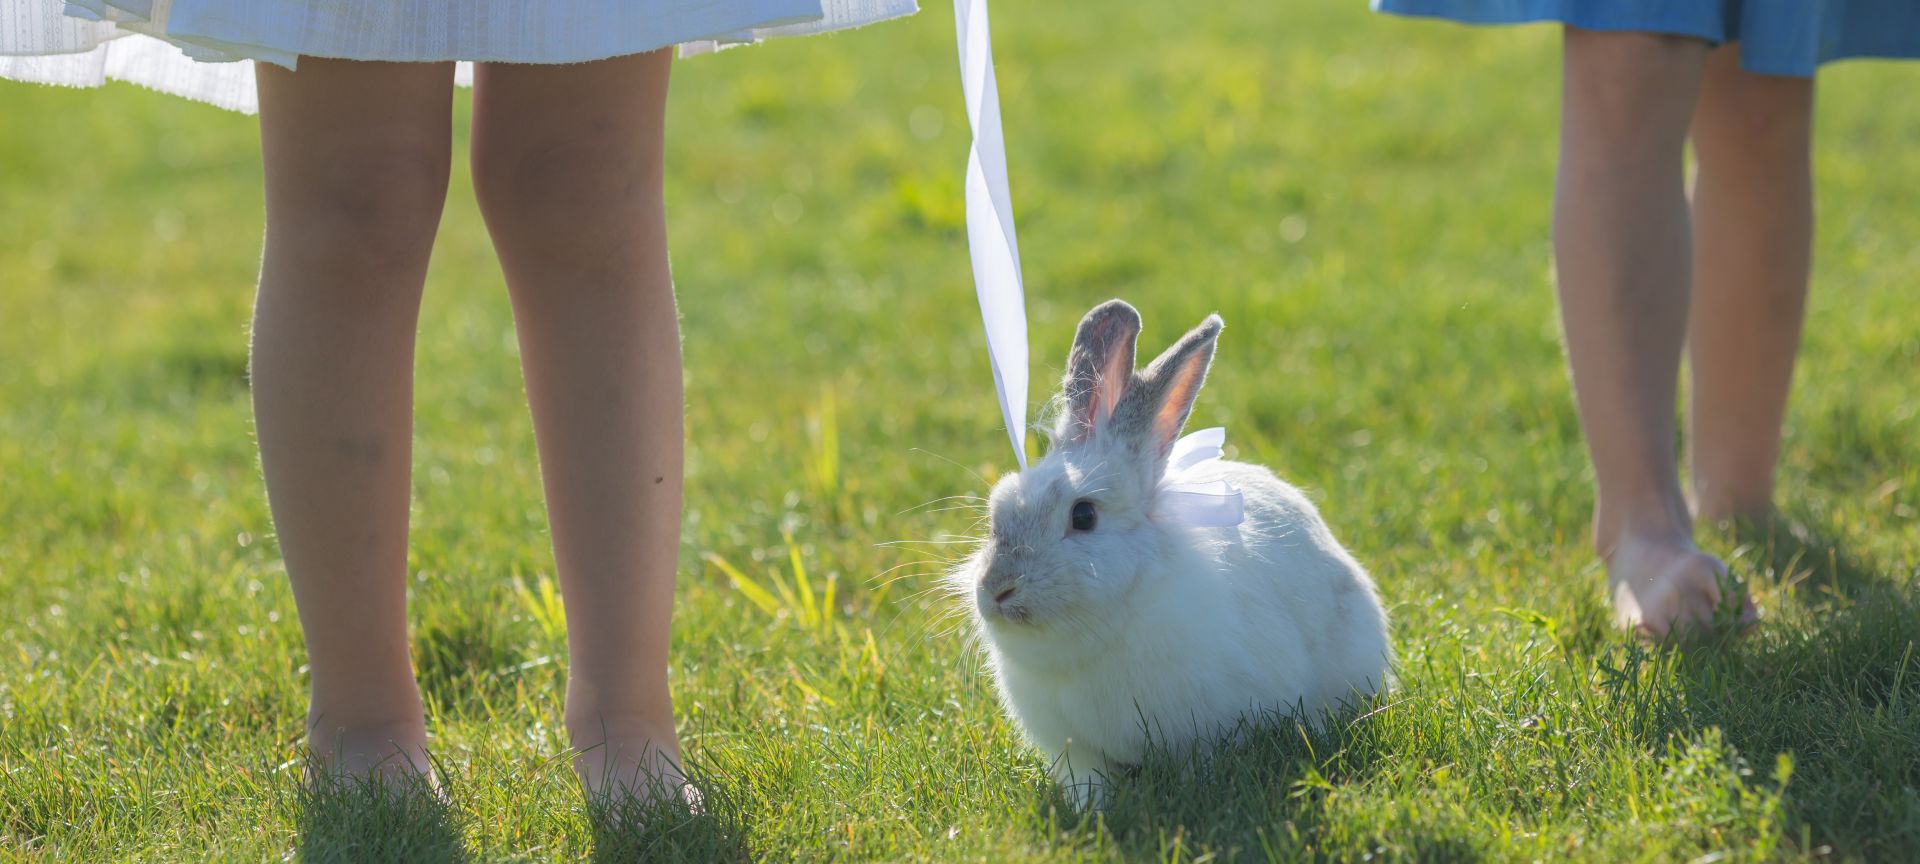 A Person Holding A String To A Rabbit In A Grassy Area